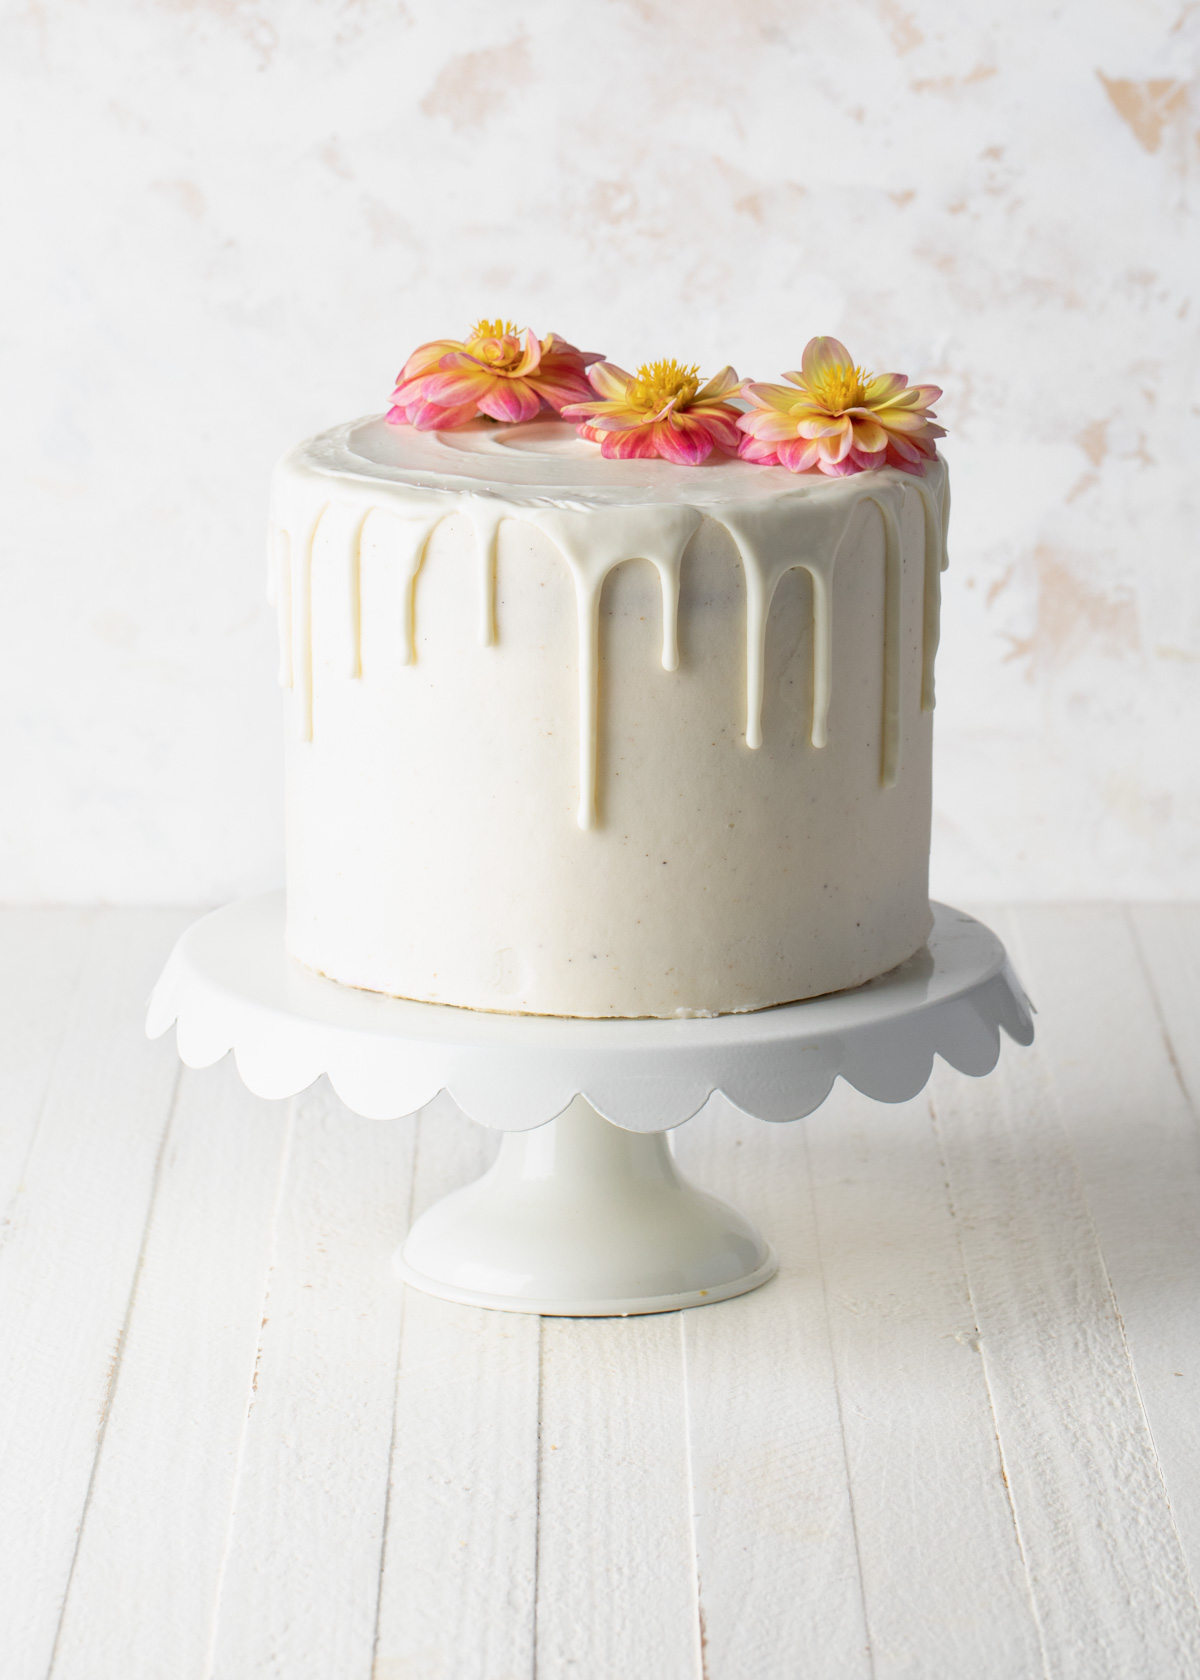 An all white cake with a white chocolate drip on a white cake stand.